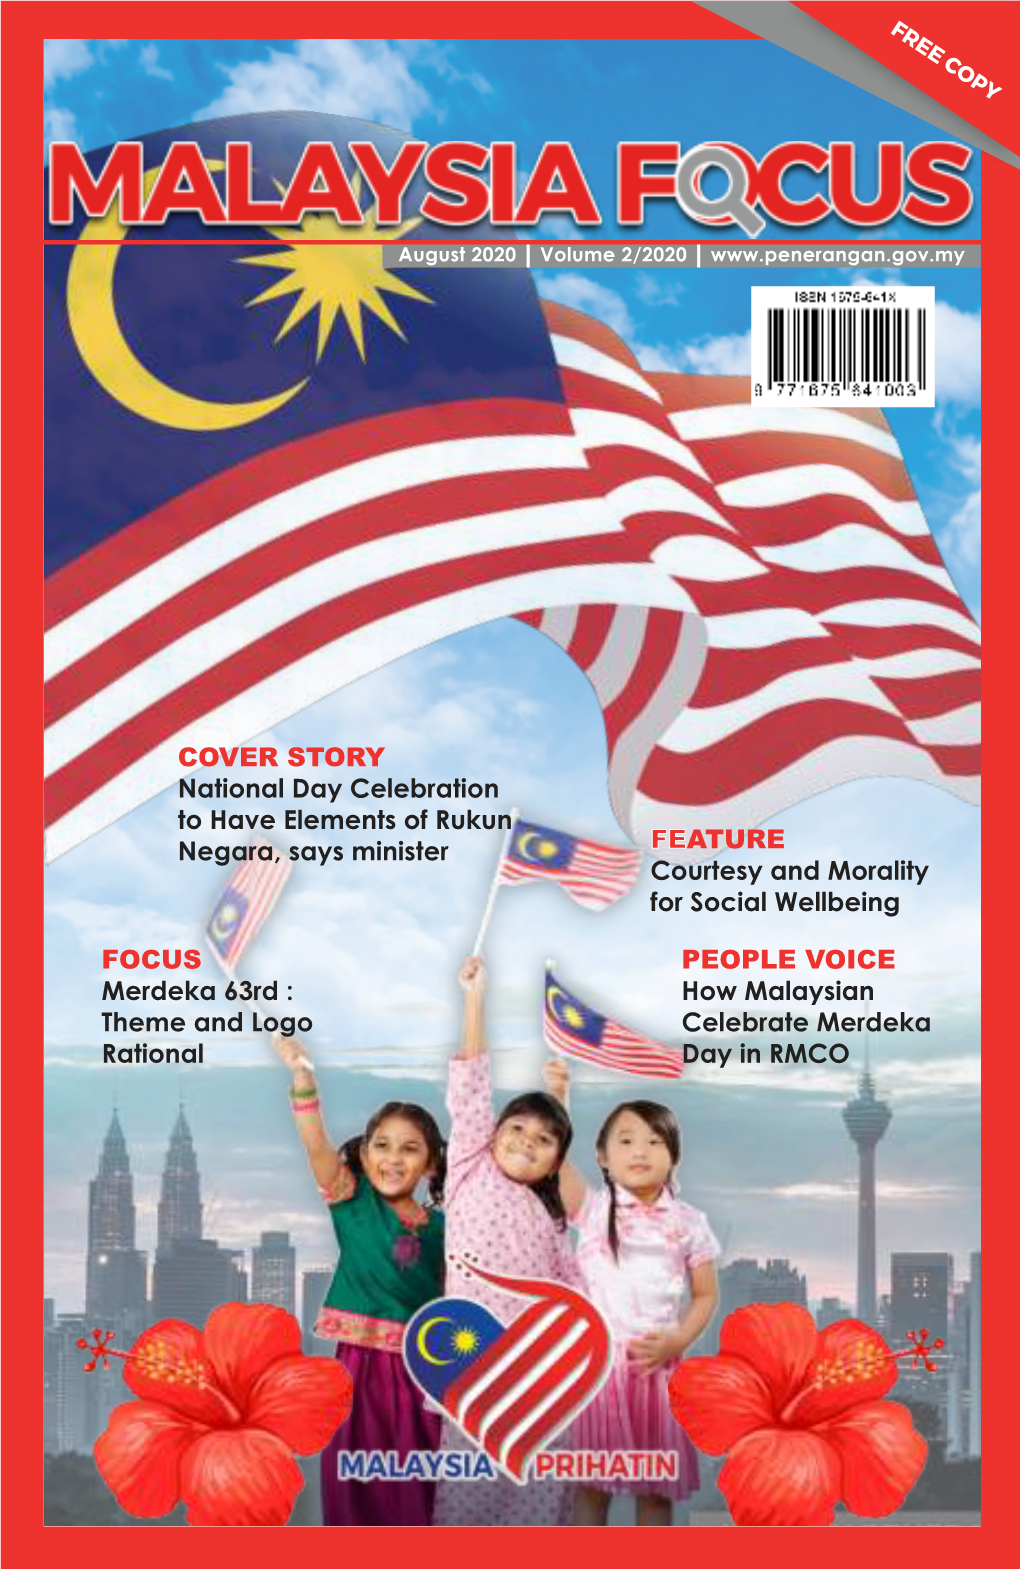 COVER STORY National Day Celebration to Have Elements of Rukun Negara, Says Minister FEATURE Courtesy and Morality for Social Wellbeing